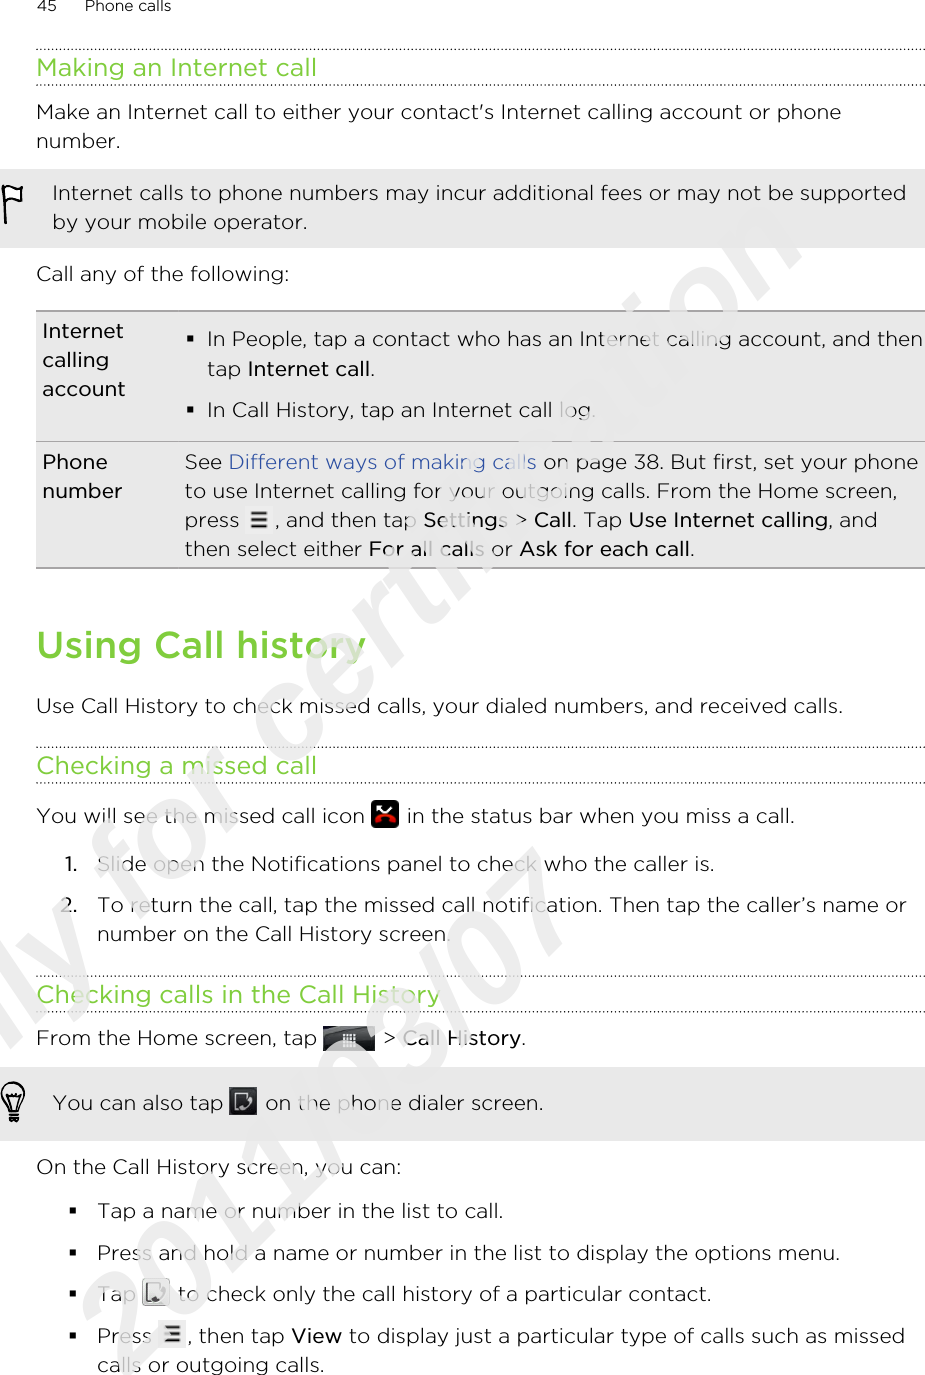 Making an Internet callMake an Internet call to either your contact&apos;s Internet calling account or phonenumber.Internet calls to phone numbers may incur additional fees or may not be supportedby your mobile operator.Call any of the following:Internetcallingaccount§In People, tap a contact who has an Internet calling account, and thentap Internet call.§In Call History, tap an Internet call log.PhonenumberSee Different ways of making calls on page 38. But first, set your phoneto use Internet calling for your outgoing calls. From the Home screen,press  , and then tap Settings &gt; Call. Tap Use Internet calling, andthen select either For all calls or Ask for each call.Using Call historyUse Call History to check missed calls, your dialed numbers, and received calls.Checking a missed callYou will see the missed call icon   in the status bar when you miss a call.1. Slide open the Notifications panel to check who the caller is.2. To return the call, tap the missed call notification. Then tap the caller’s name ornumber on the Call History screen.Checking calls in the Call HistoryFrom the Home screen, tap   &gt; Call History. You can also tap   on the phone dialer screen.On the Call History screen, you can:§Tap a name or number in the list to call.§Press and hold a name or number in the list to display the options menu.§Tap   to check only the call history of a particular contact.§Press  , then tap View to display just a particular type of calls such as missedcalls or outgoing calls.45 Phone callsOnly for certification  2011/03/07